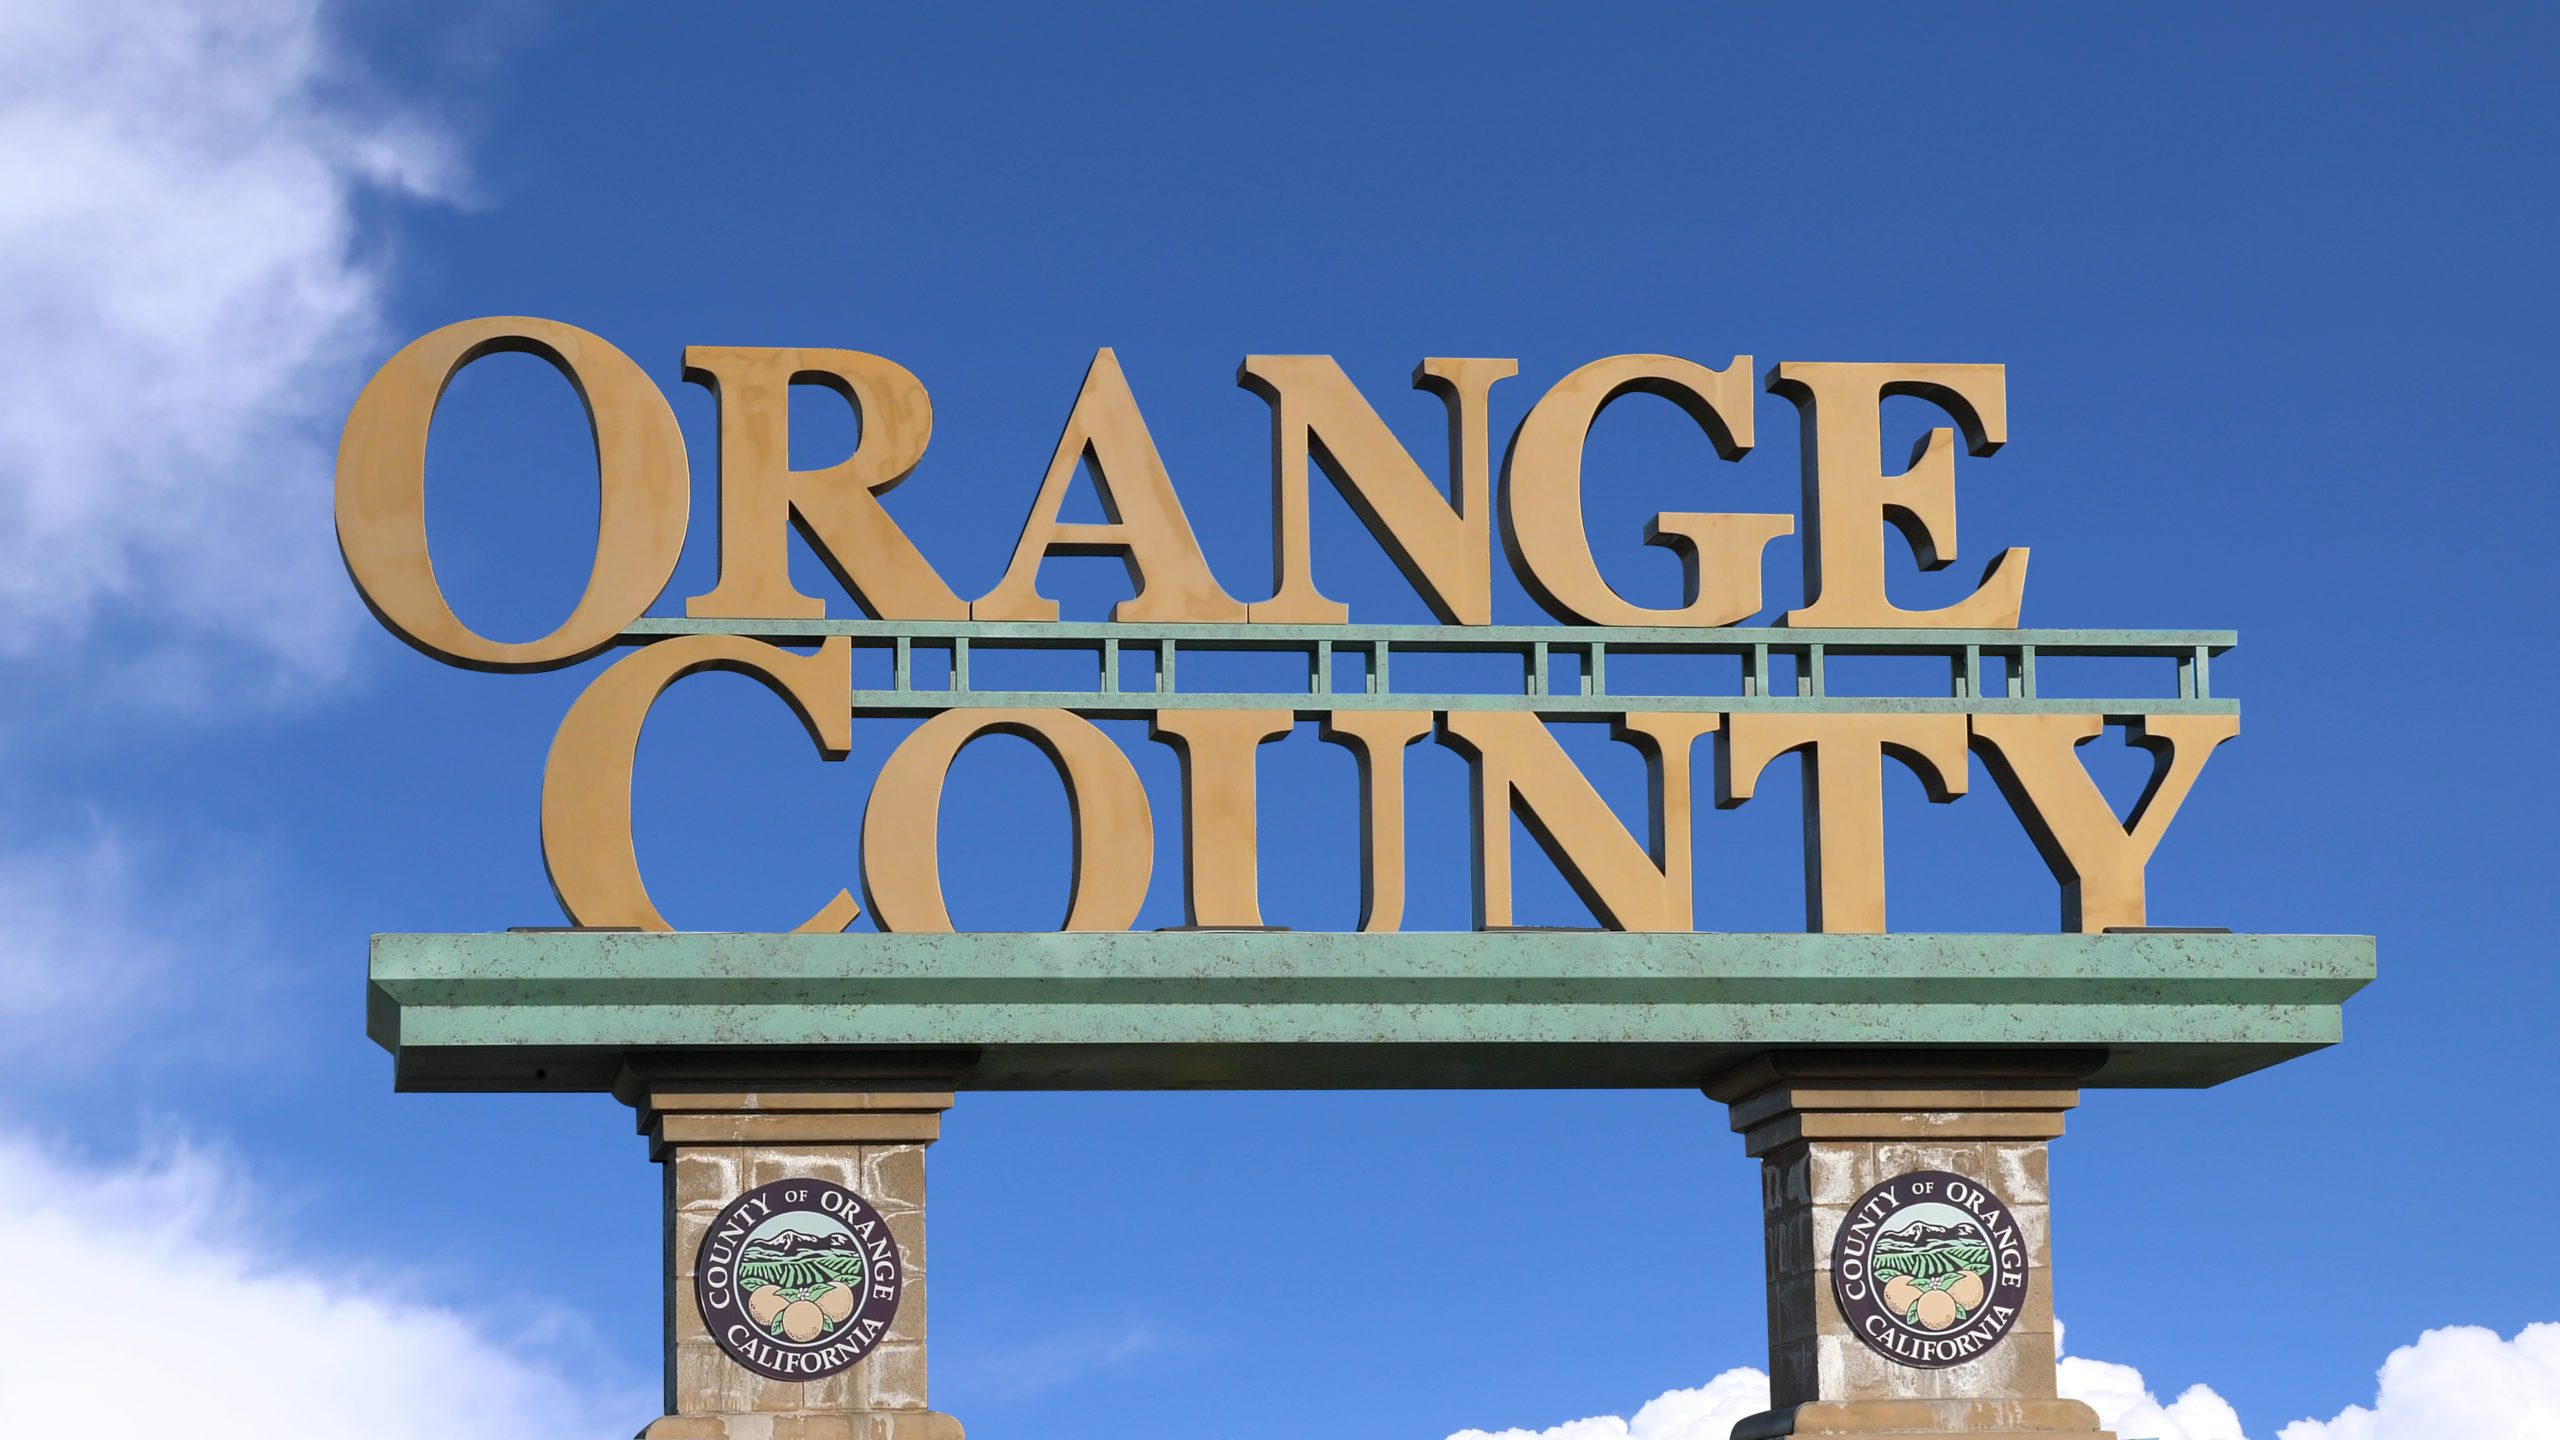 Top Places to Live in Orange County Based on Quality of Life